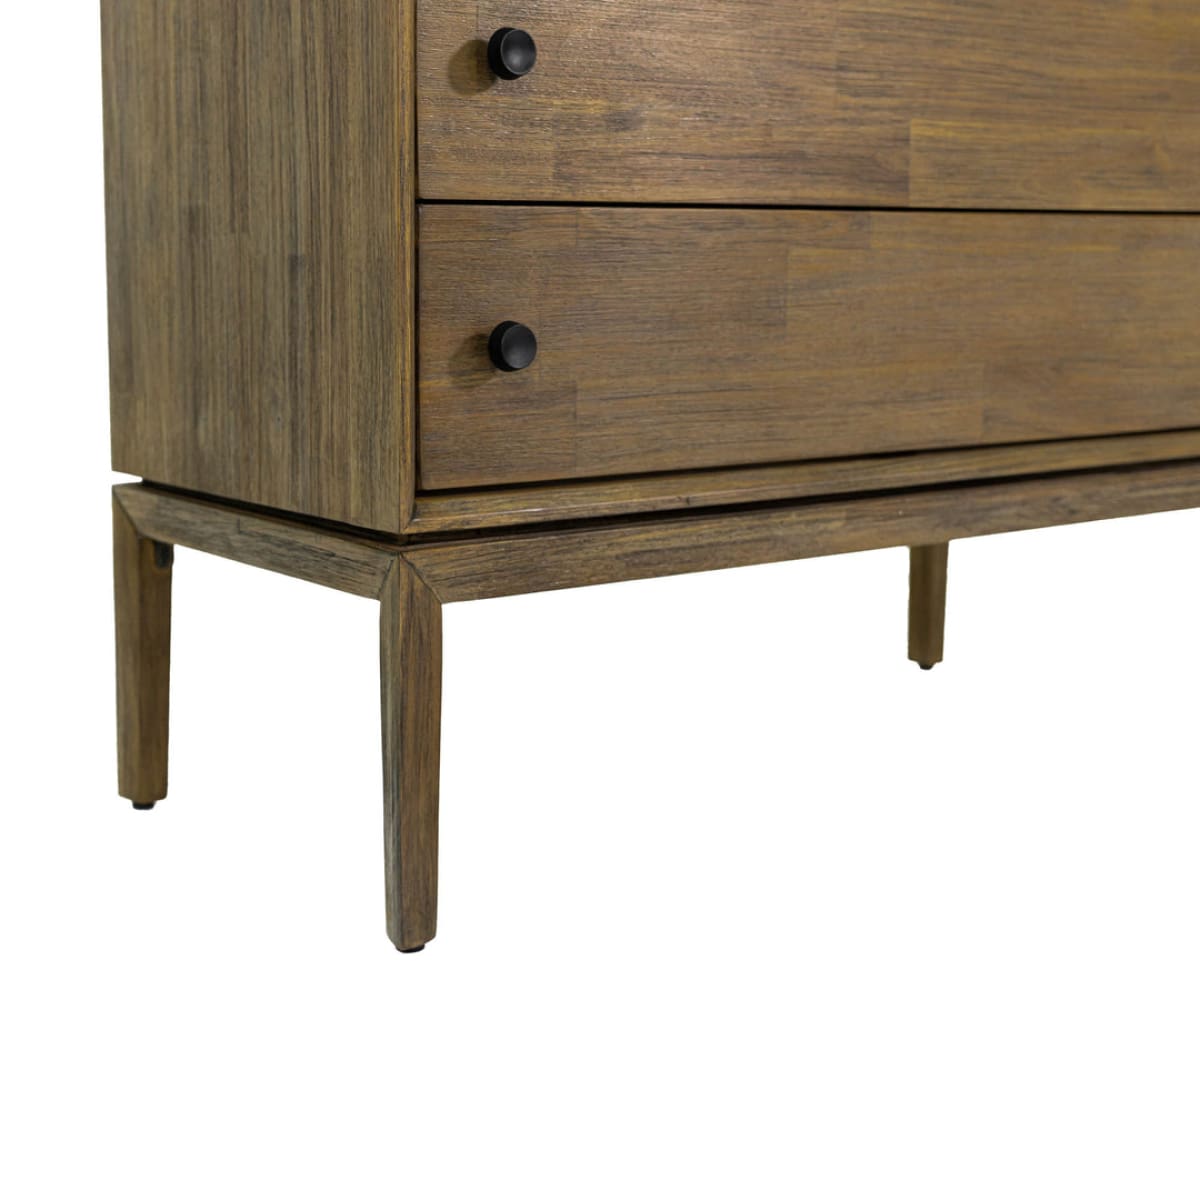 West Chest 5 Drawers - lh-import-dressers